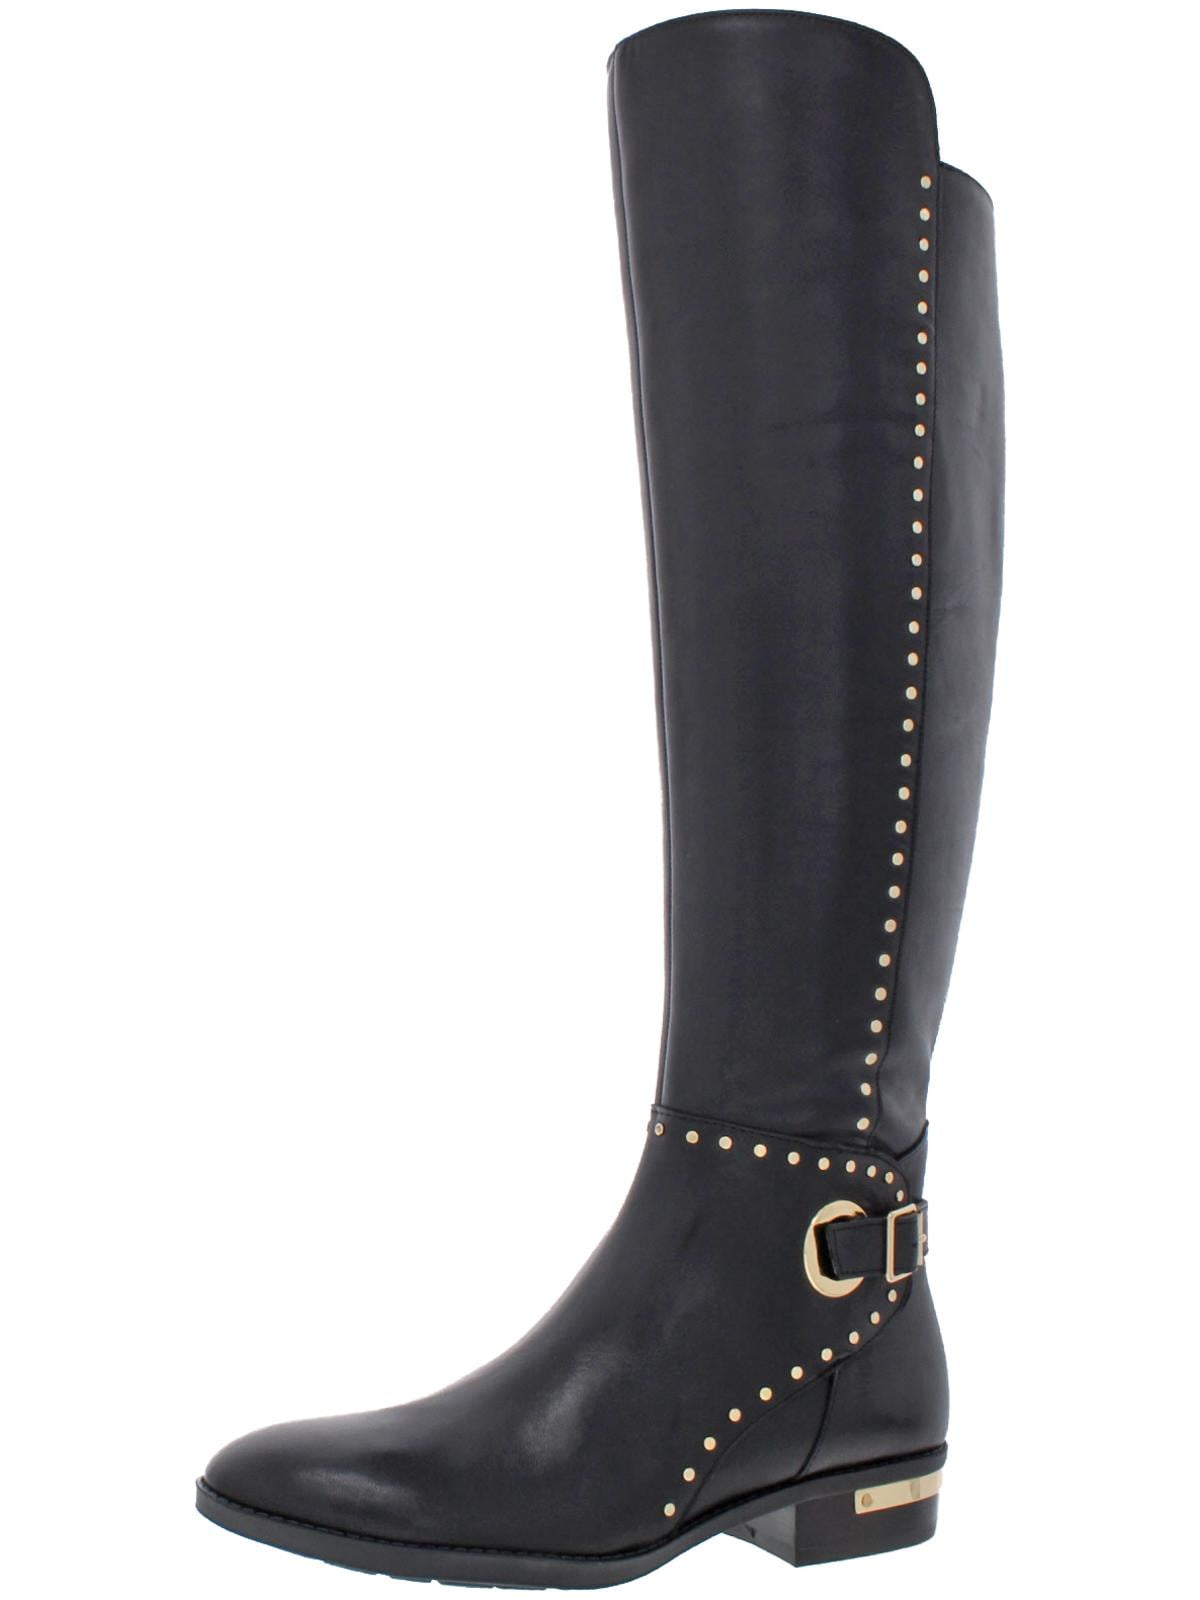 vince camuto leather riding boots